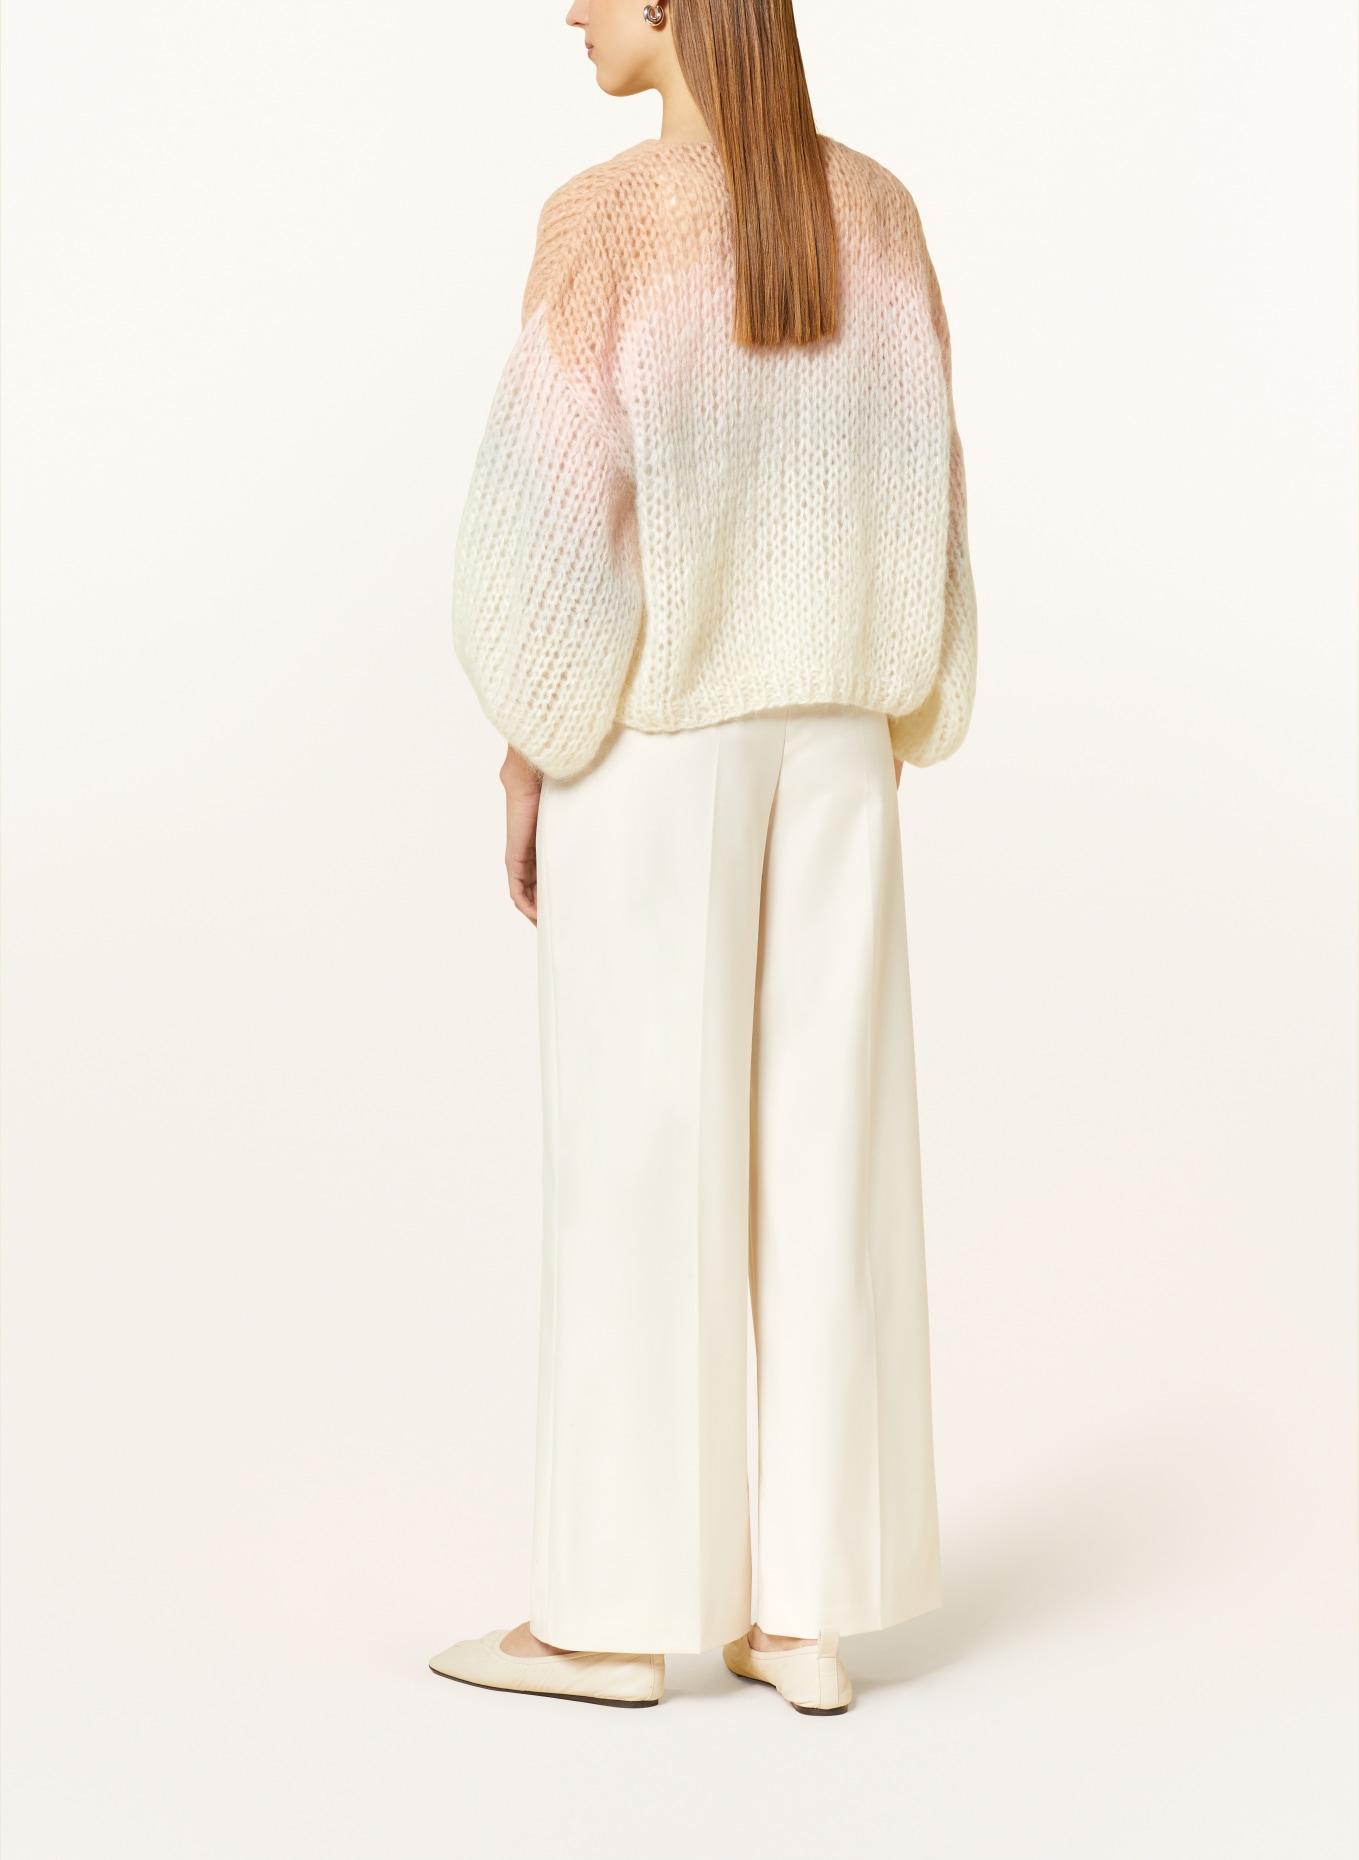 MAIAMI Oversized knit cardigan with mohair, Color: CREAM/ LIGHT PINK/ LIGHT GRAY (Image 3)